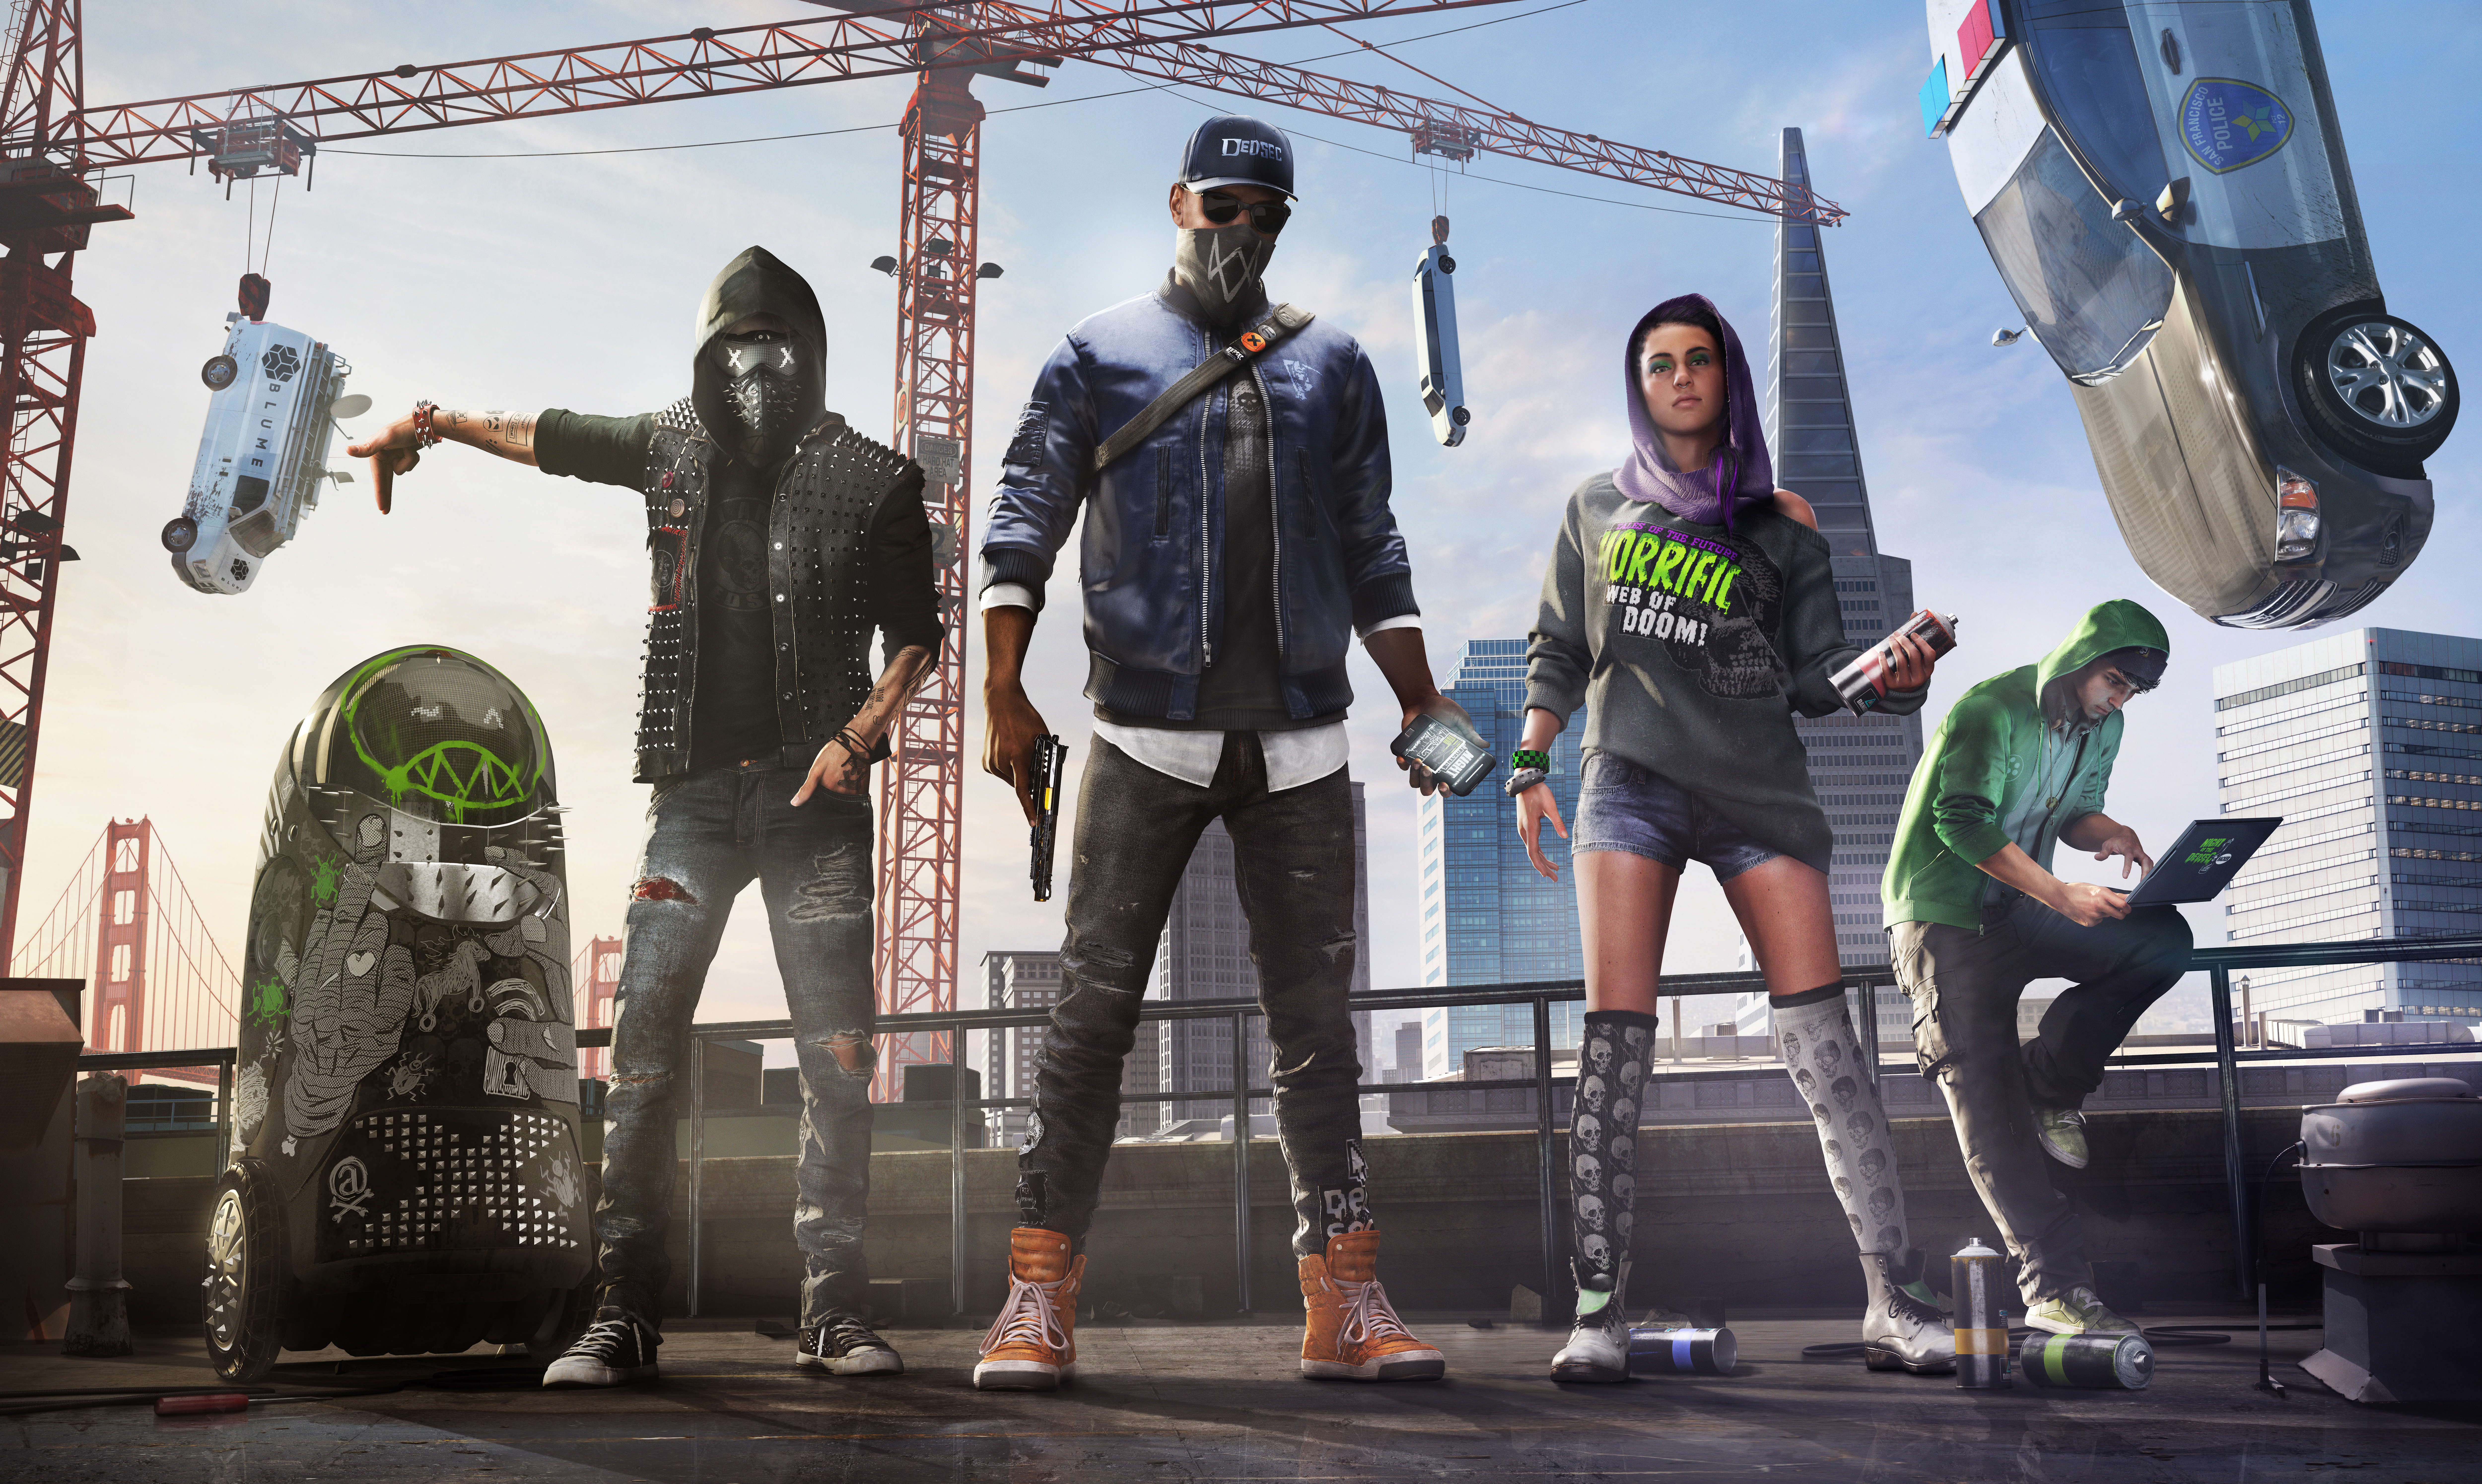 160+ Watch Dogs 2 HD Wallpapers and Backgrounds